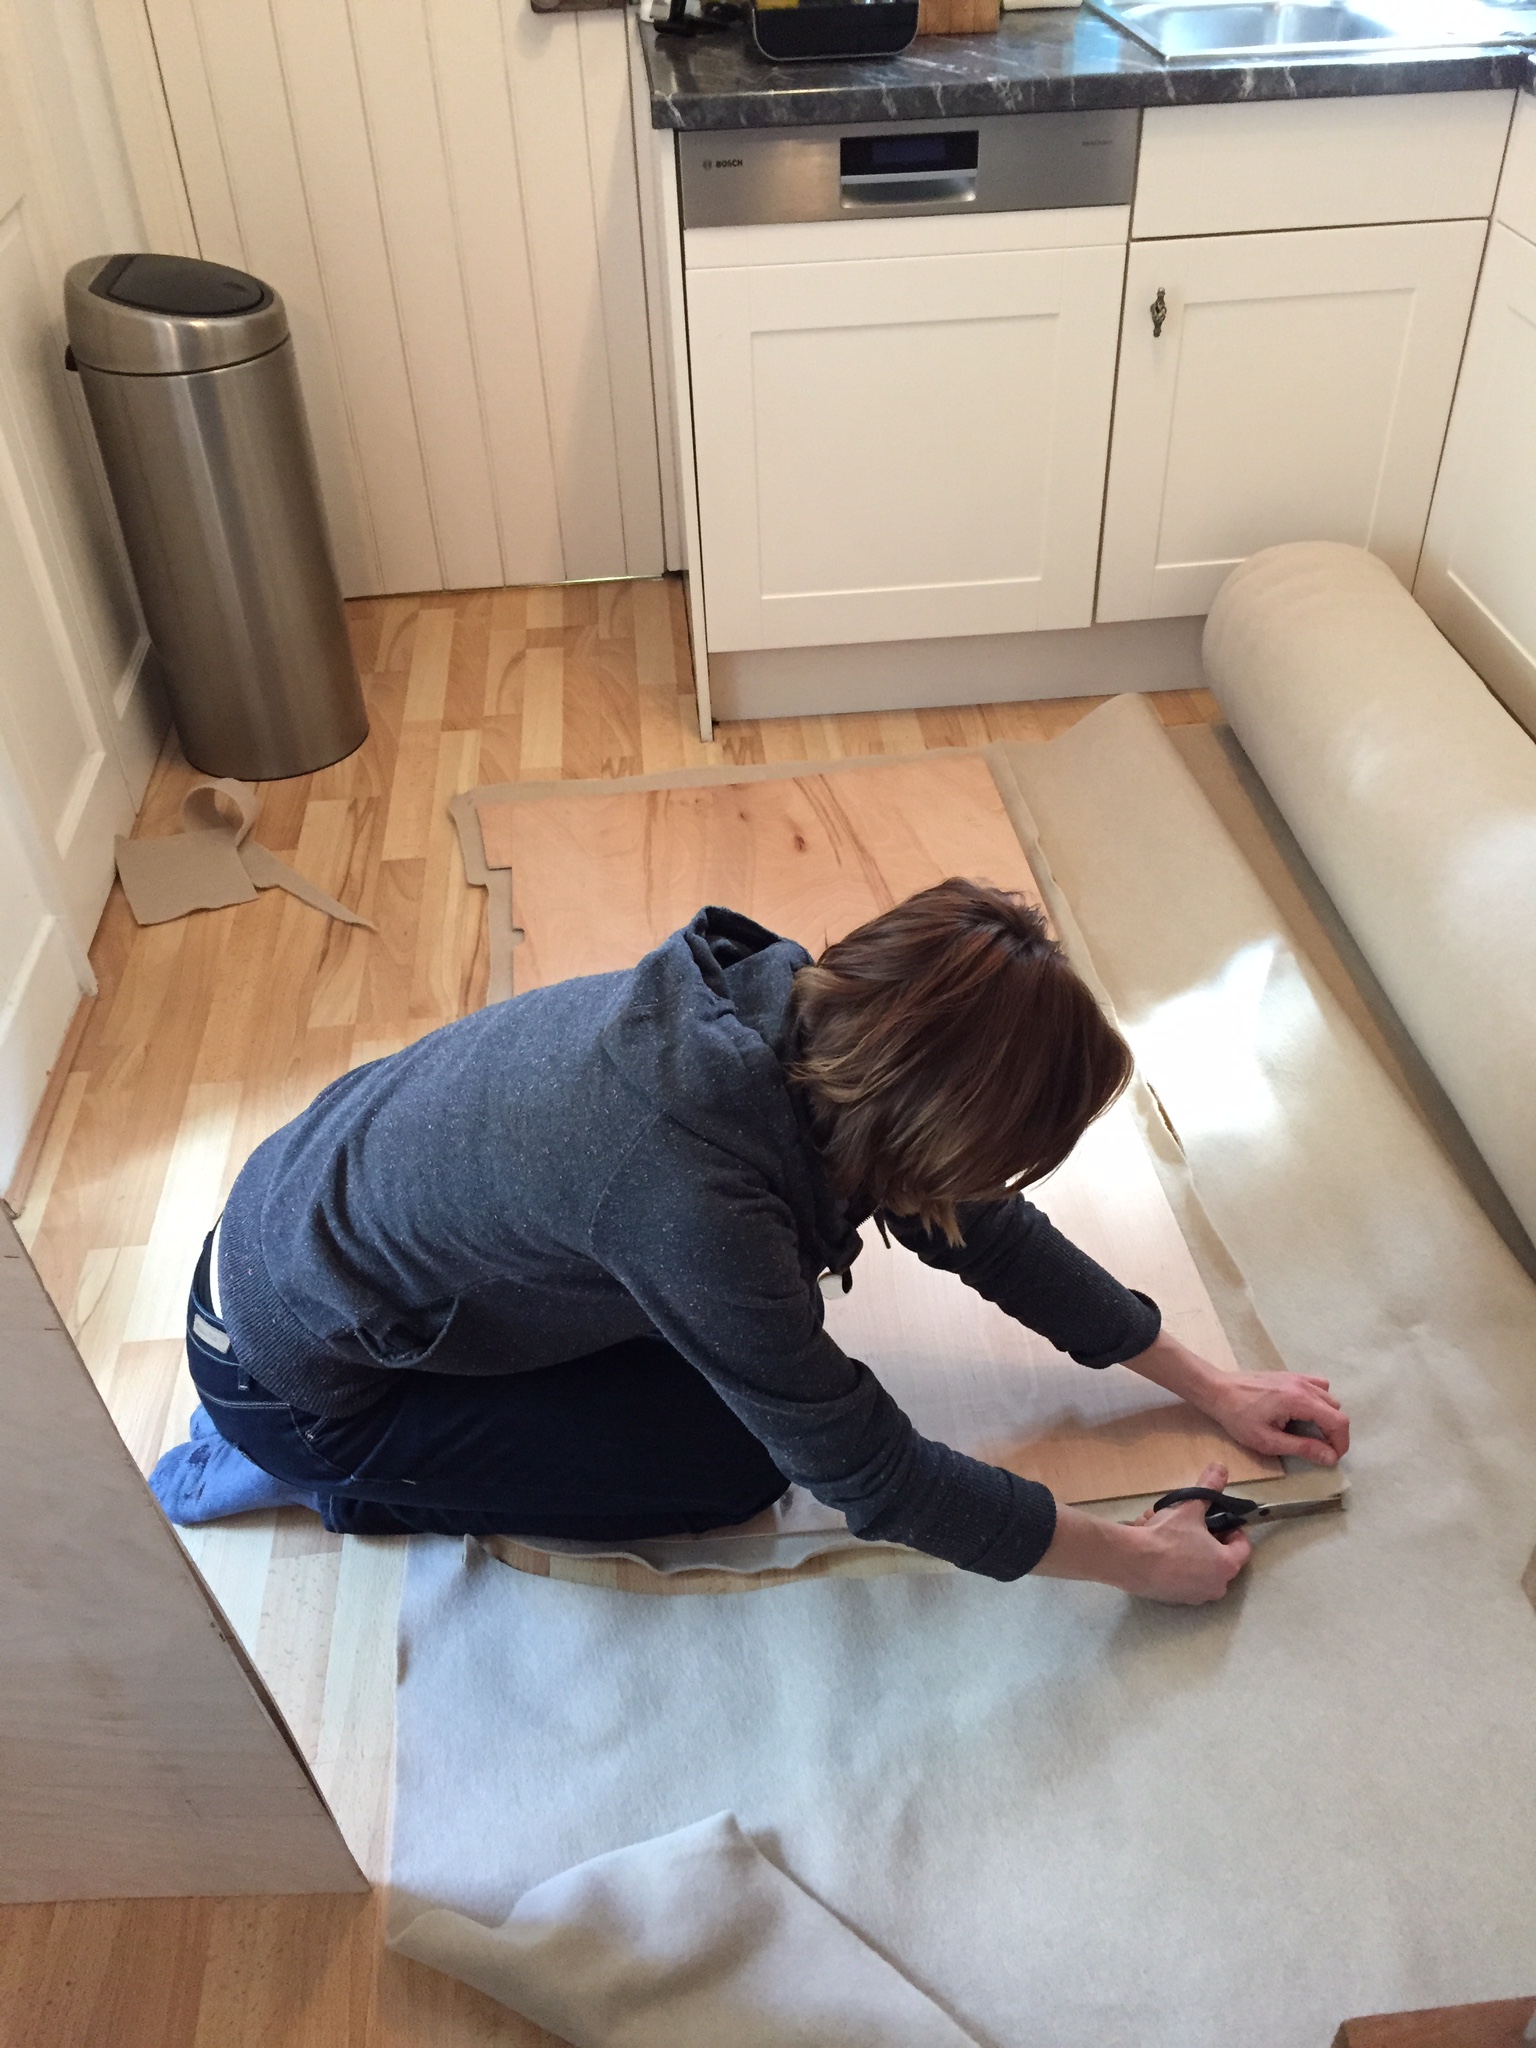 Carpeting the ceiling panels